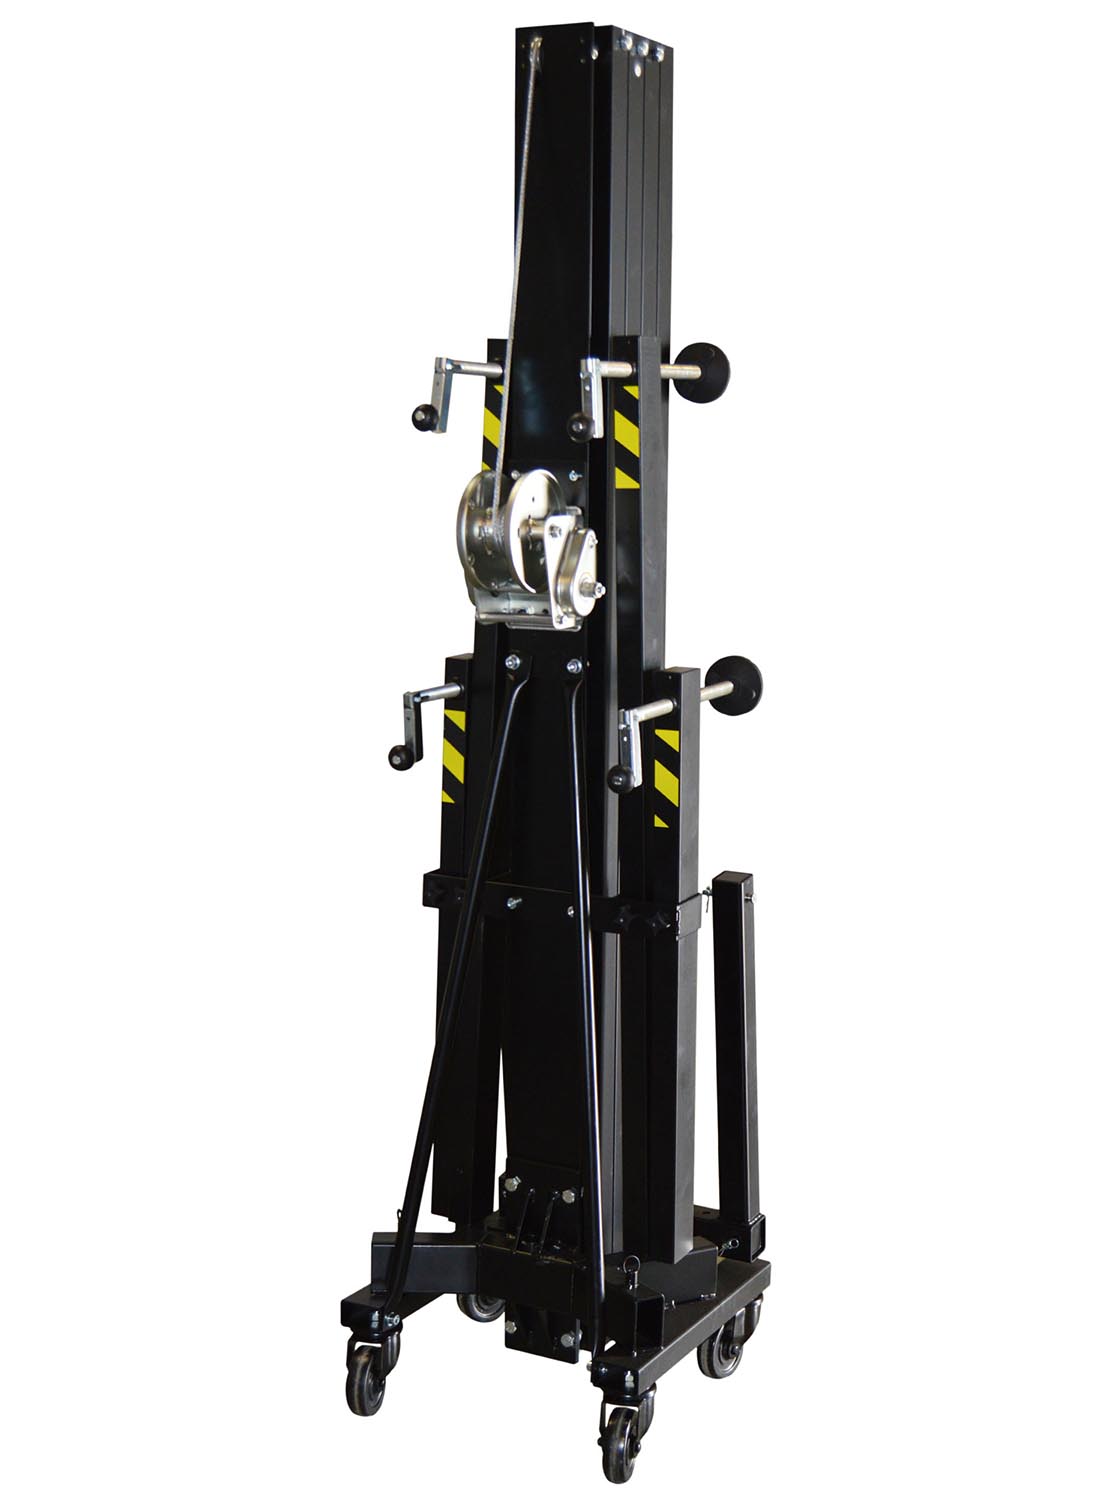 ProX XT-AT06B 21 Feet Frontal Loading Lifting Tower for Line Array System - Black - Hollywood DJ